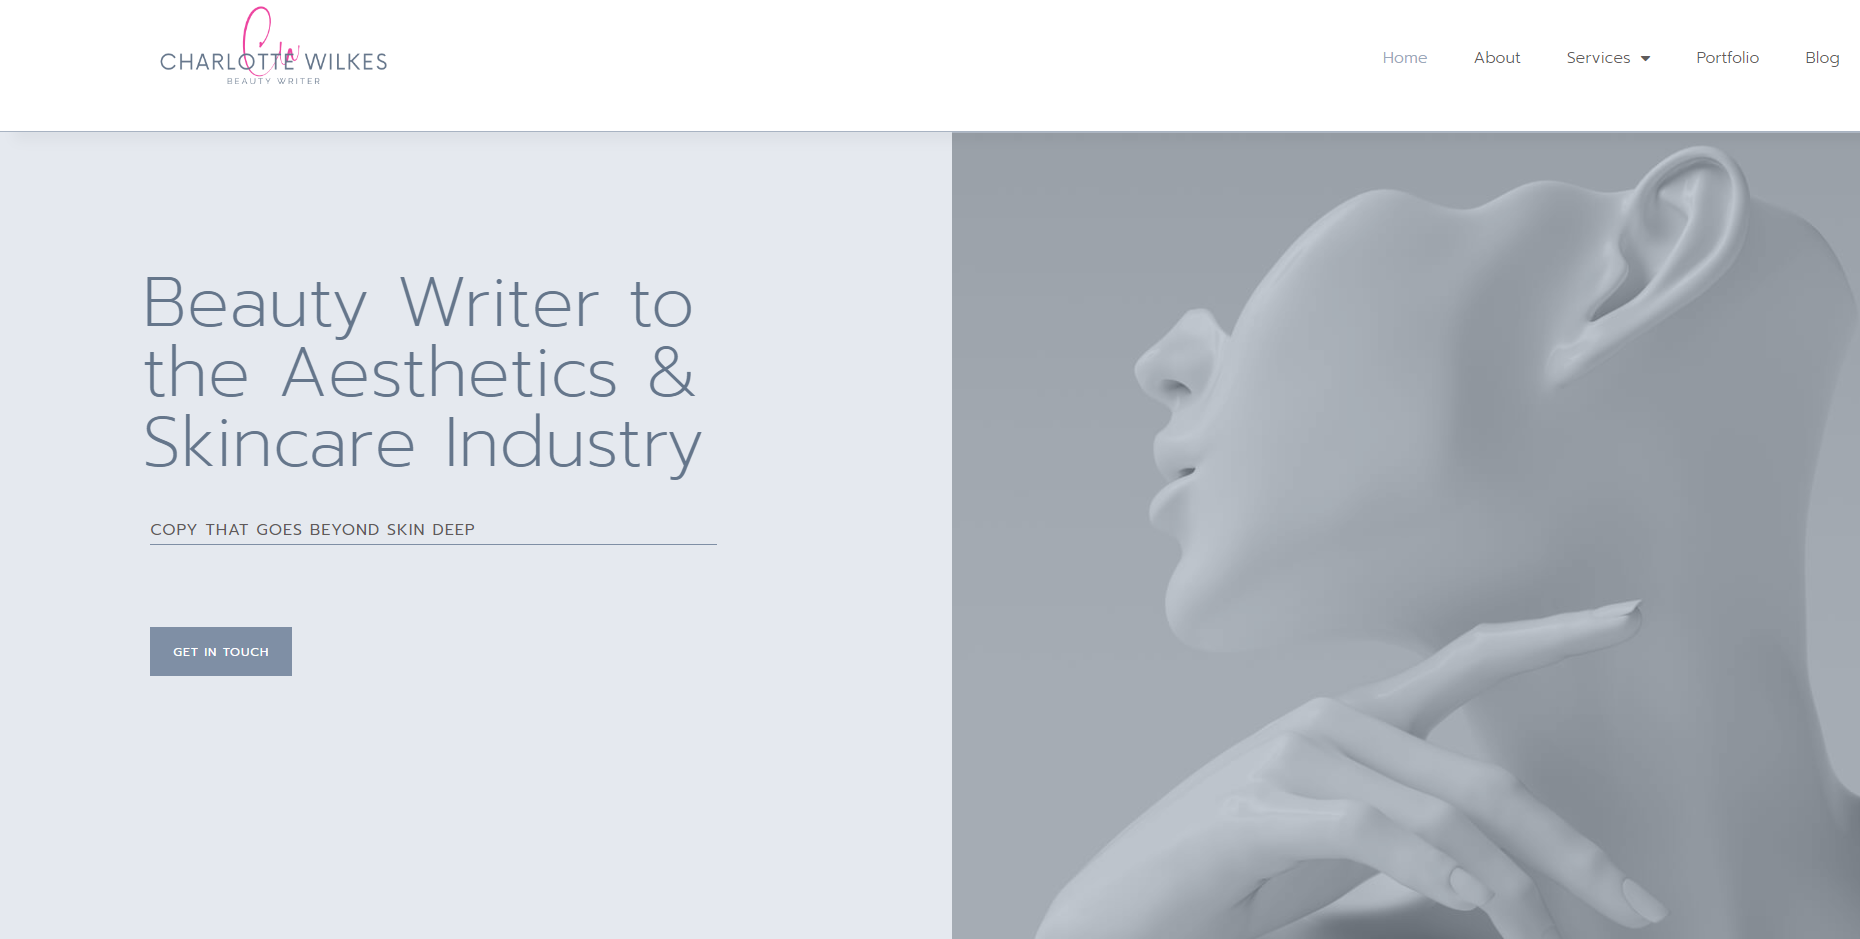 snapshot of home page for beauty copywriter Charlotte Wilkes. The page shows the logo in the top left-hand corner, which is her name is script. The headline reads "beauty writer to the aesthetics and skincare industry". To the right, is an image of a profile of a mannequin's face in grayscale